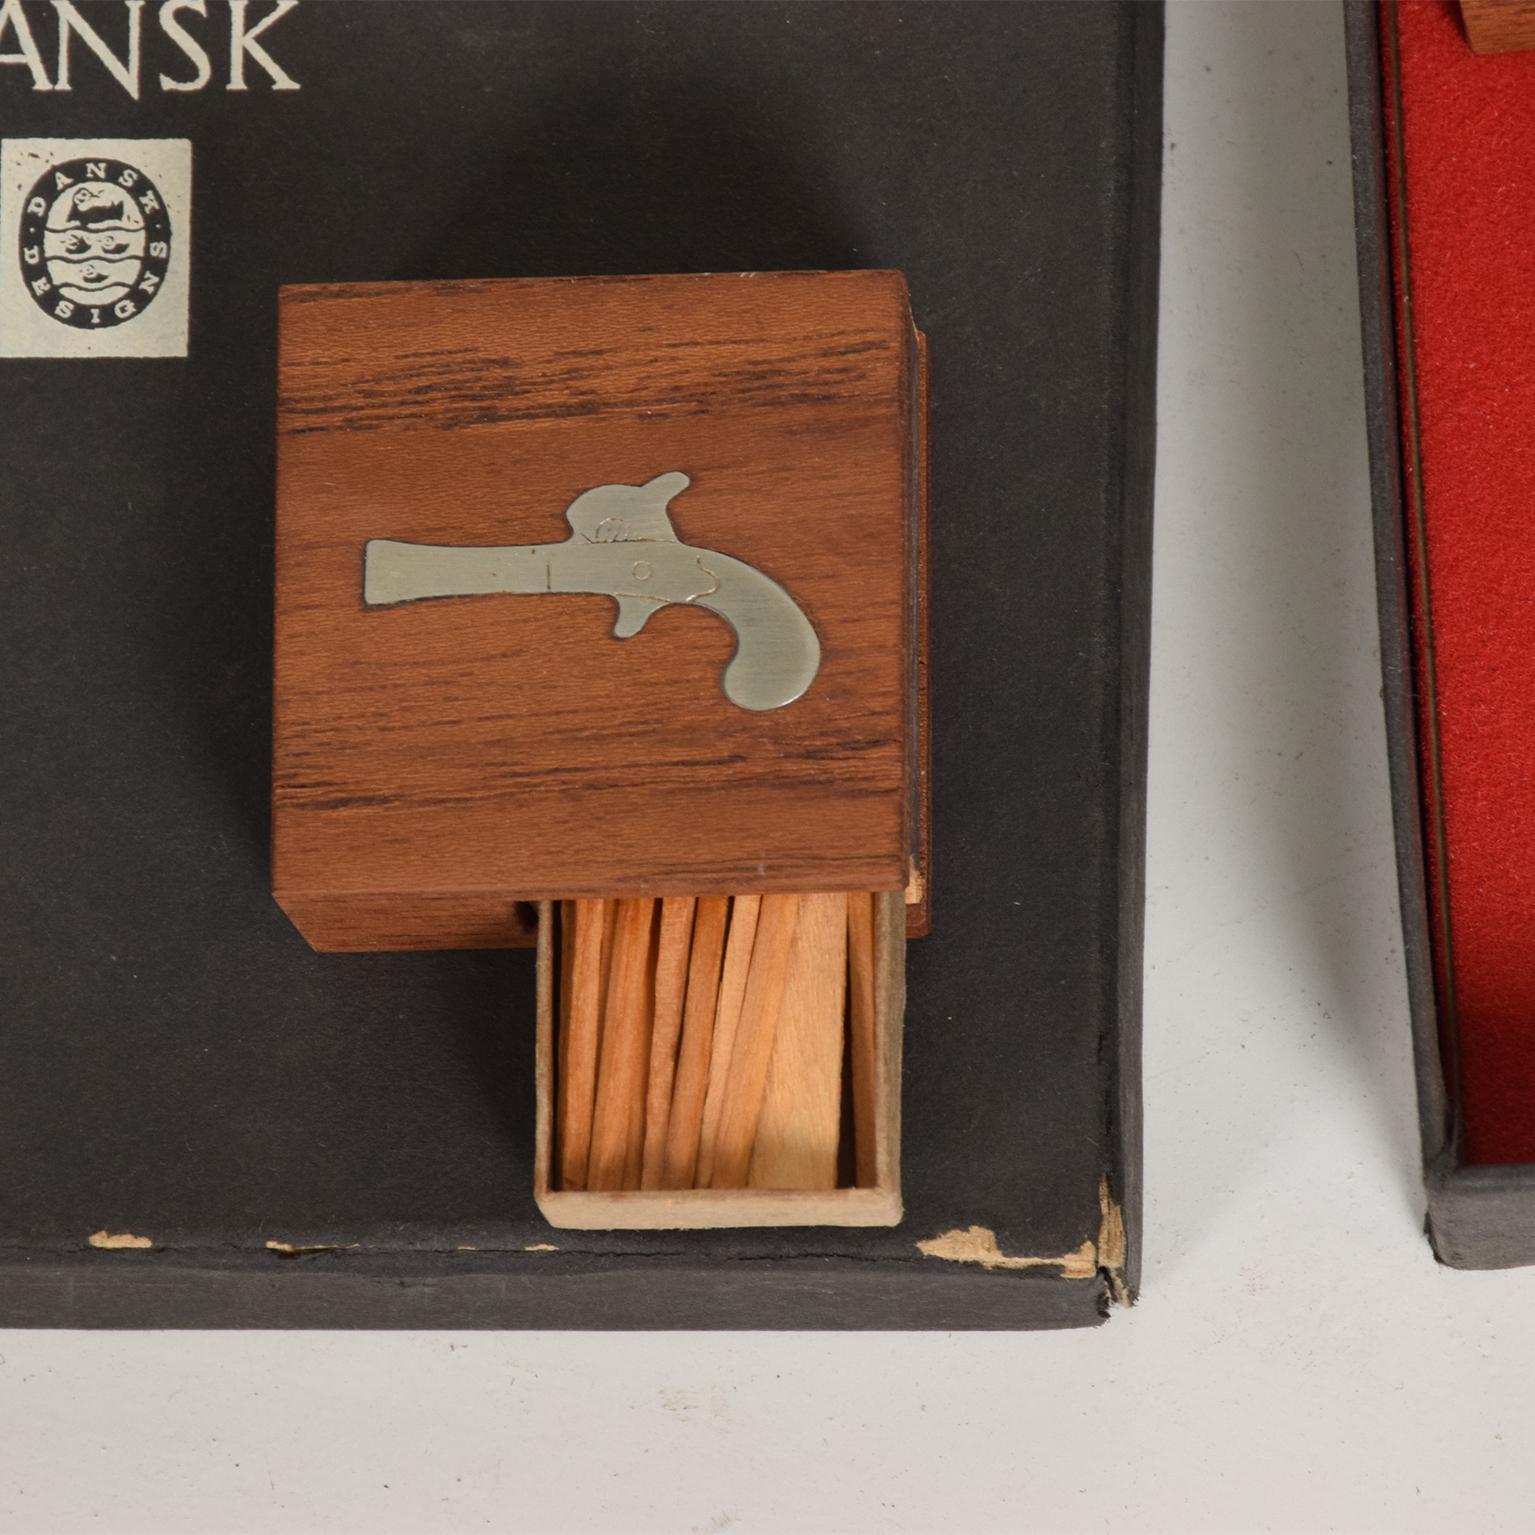 Fabulous collectible Dansk set of 4 match box holders in original packaging. Designed in Denmark 1960s by Jens Quistgaard JHQ
Made in teak wood and stainless steel
Each wooden box features a unique inlay decoration.
Dimensions: 1.75 x 1.75 x .75